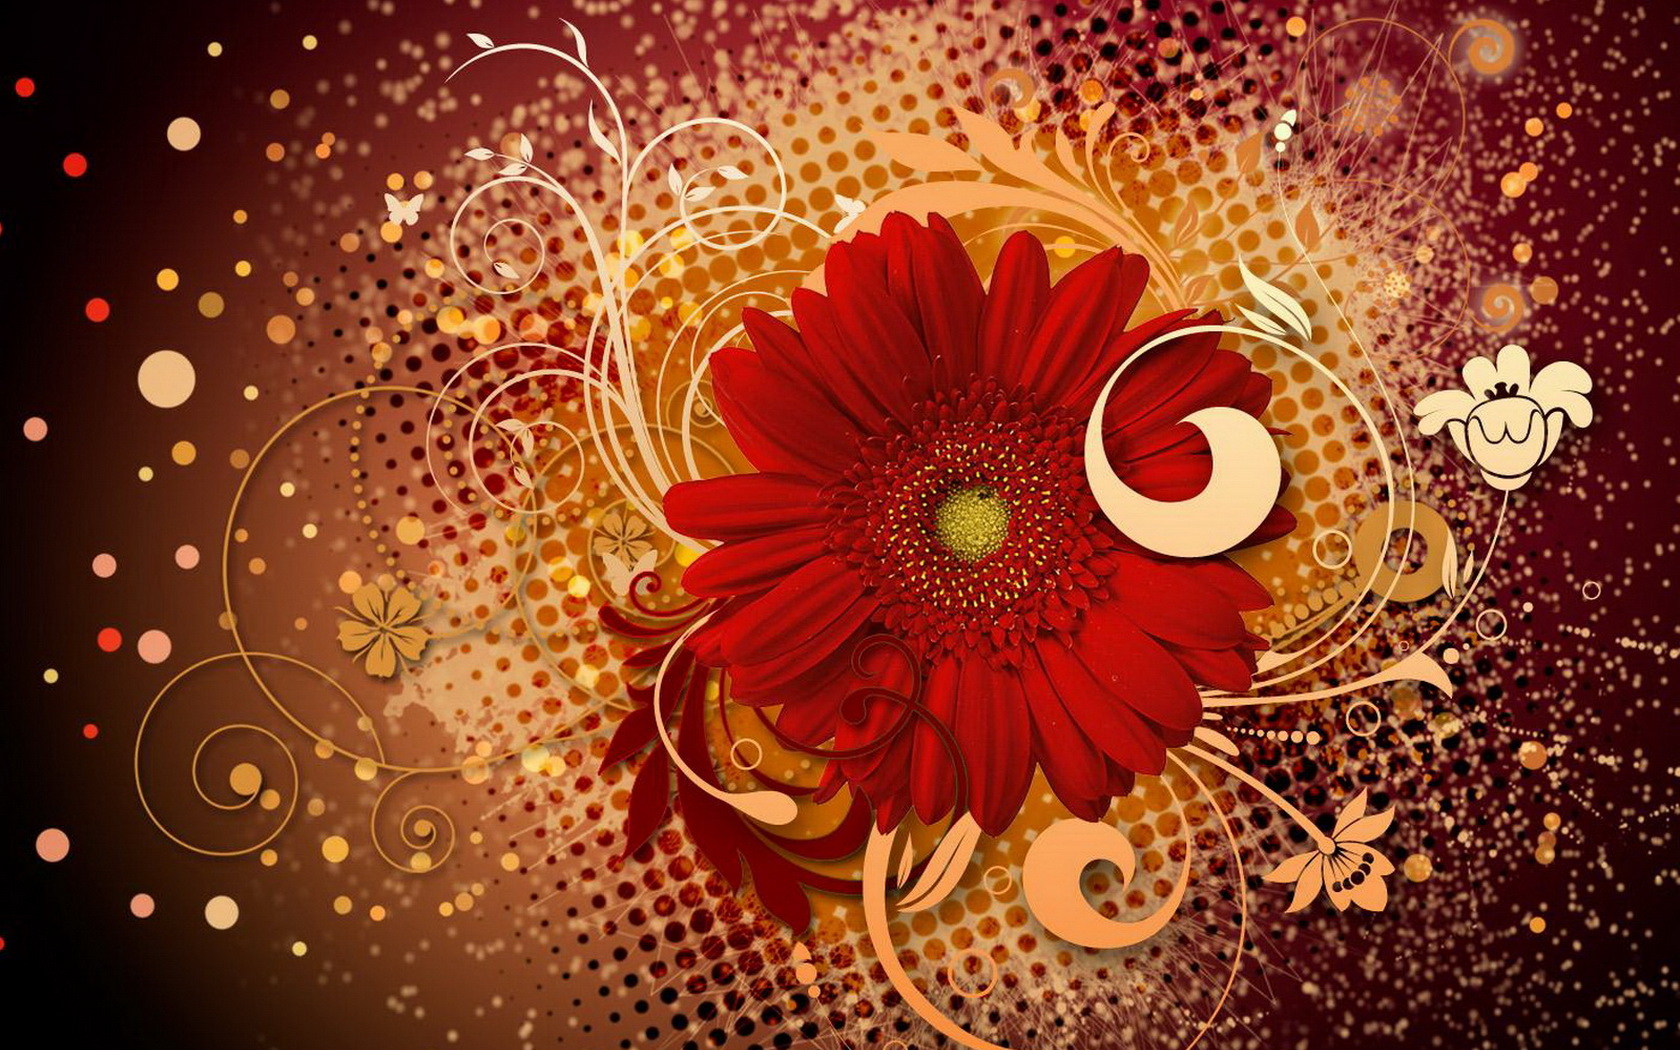 Bright Flowers Wallpaper And Image